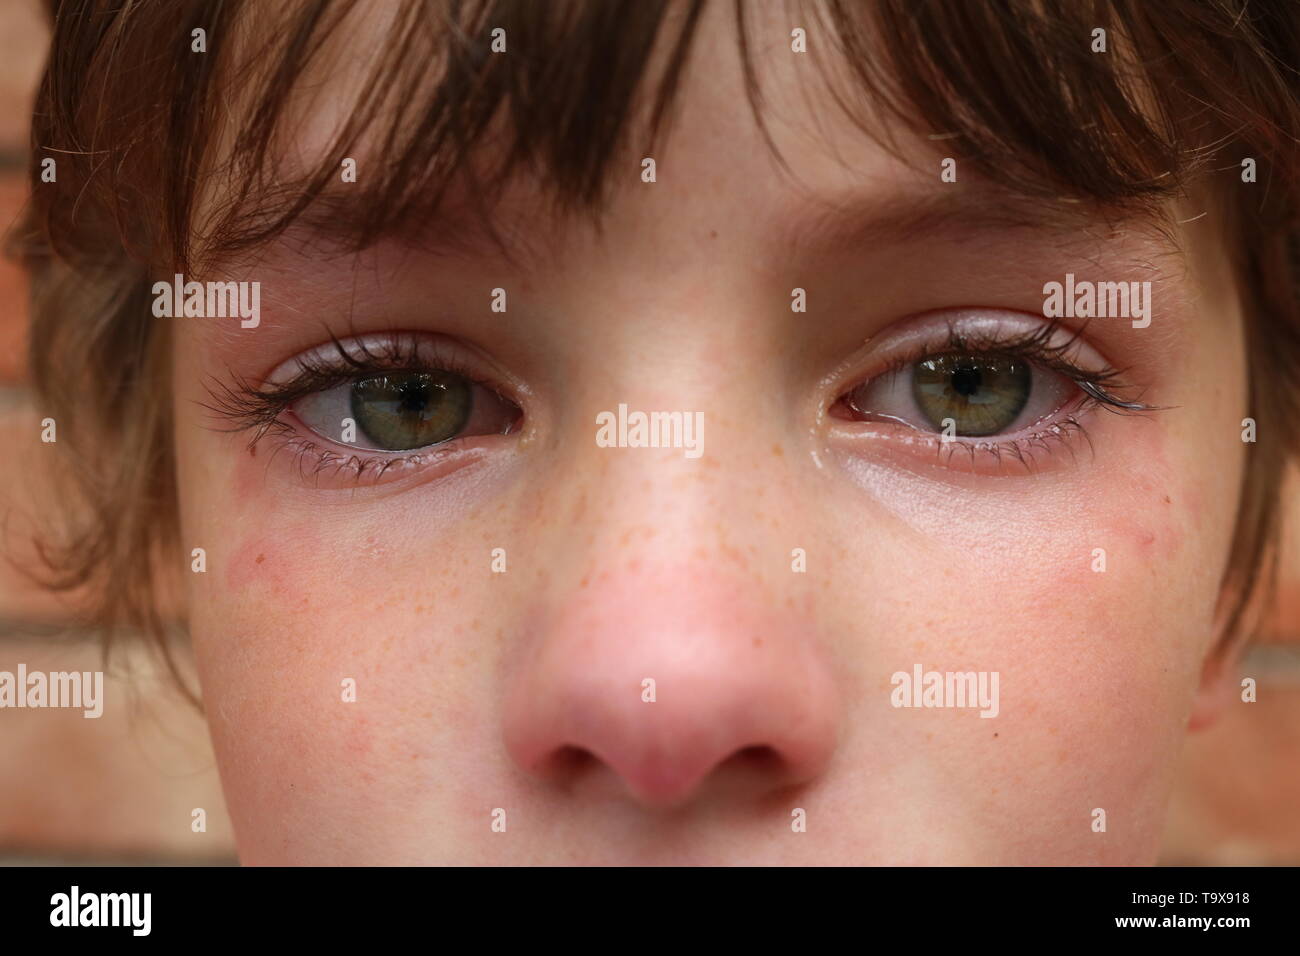 Macro shot of the eyes and nose of an upset child with big green eyes Stock Photo